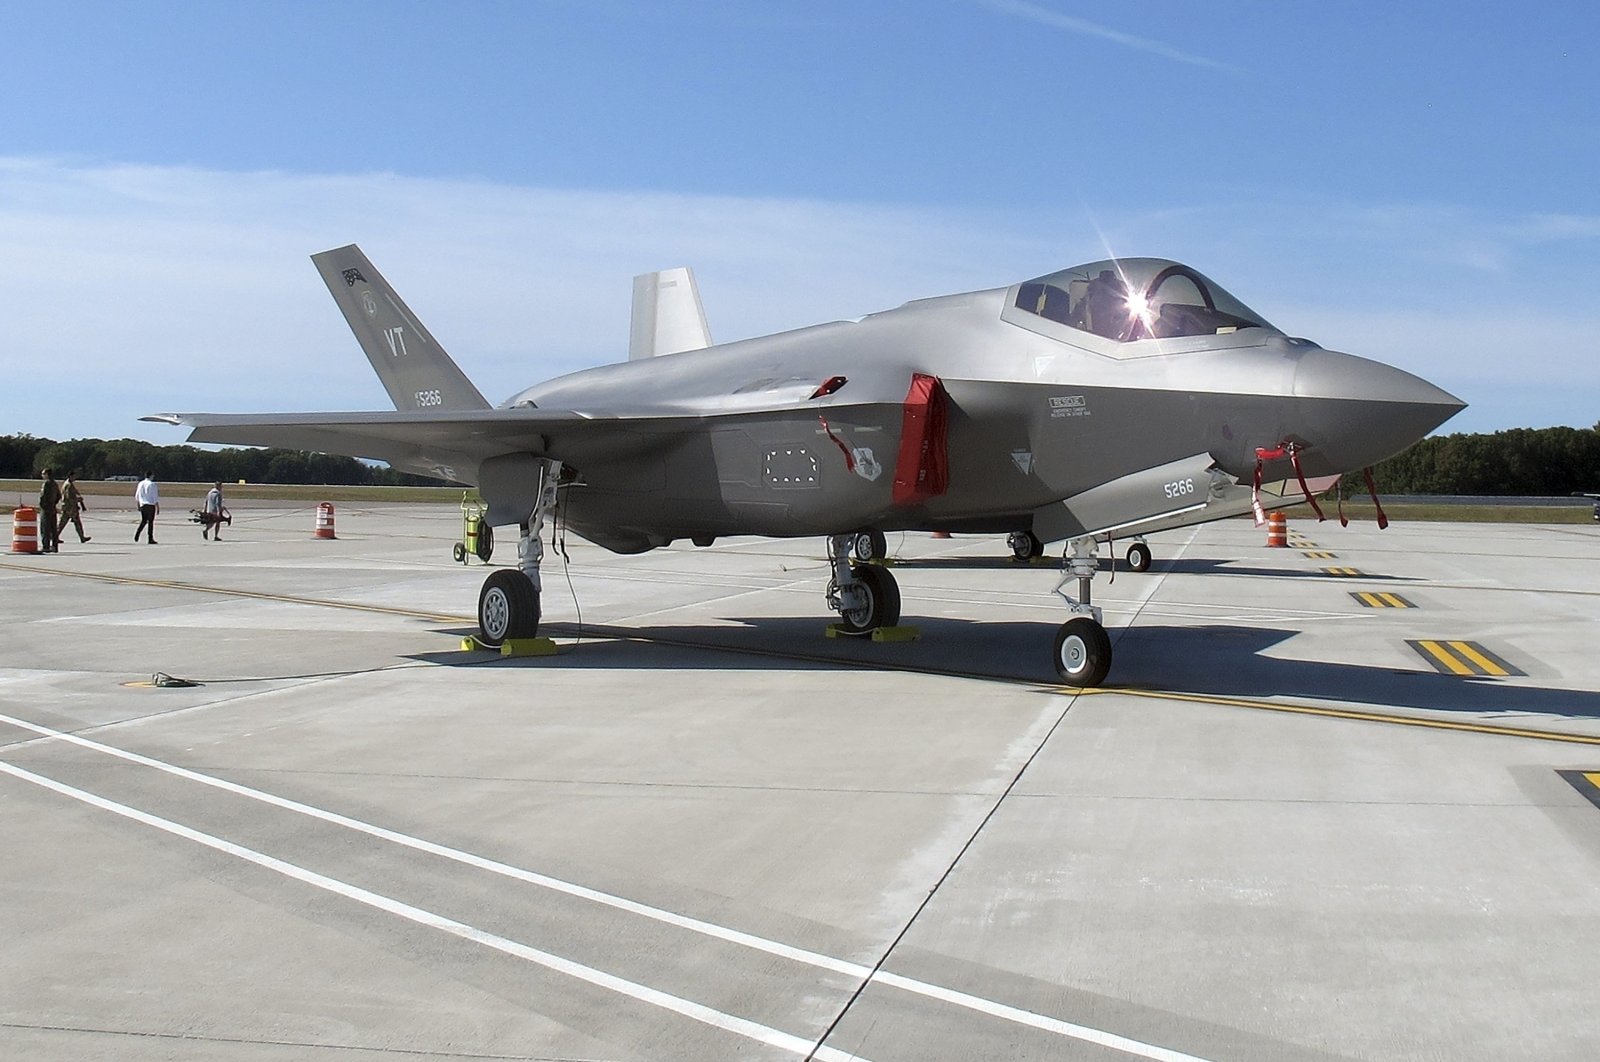 An F-35 fighter jet arrives at the Vermont Air National Guard base in South Burlington, Vermont, Sept. 19, 2019. (AP Photo)